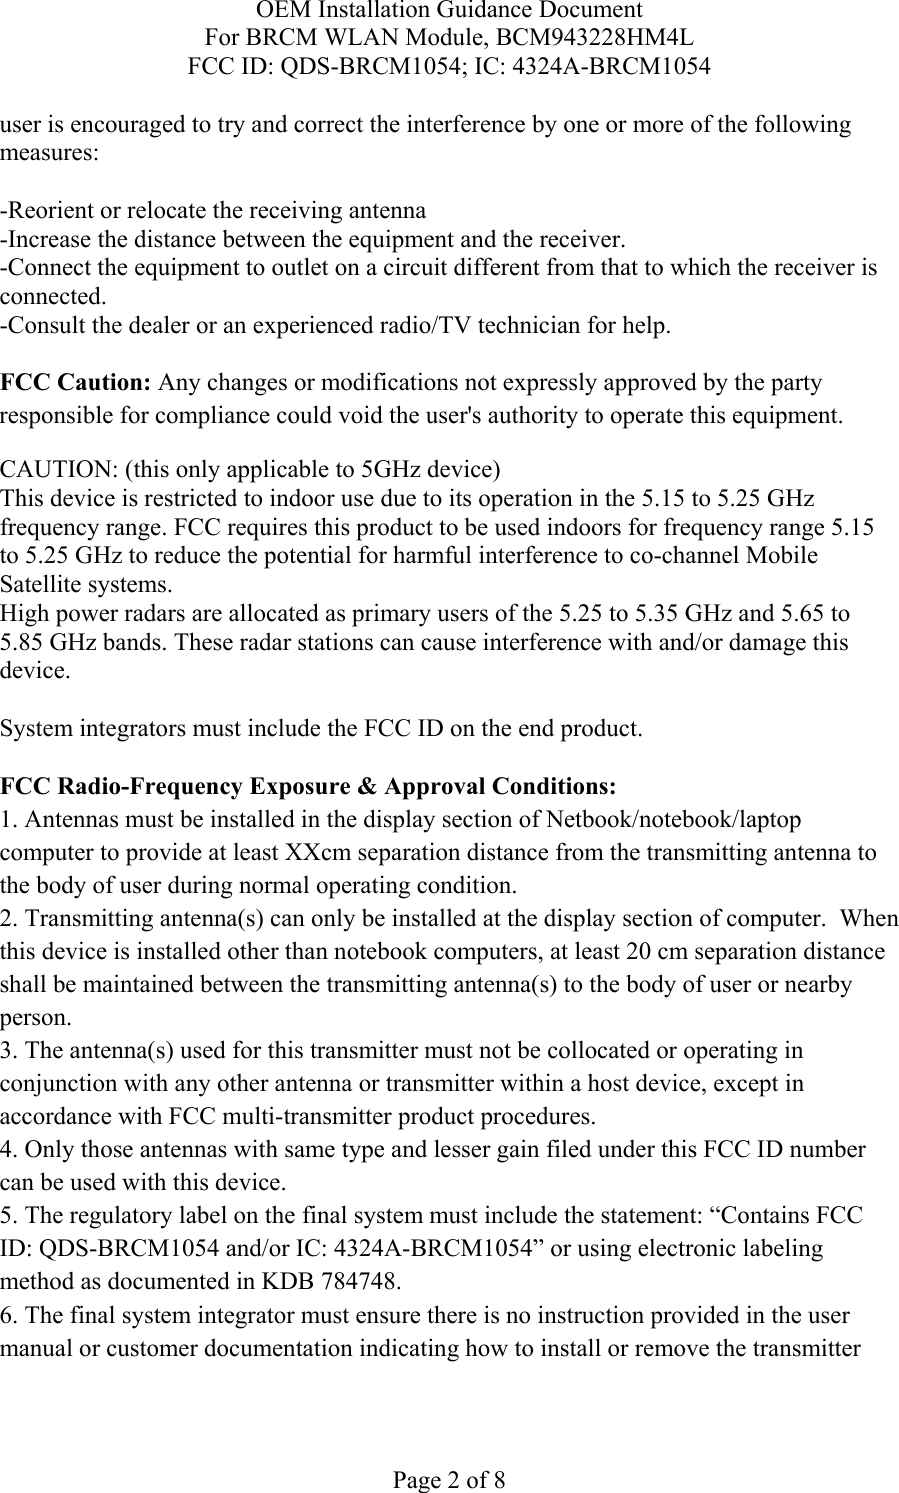 OEM Installation Guidance Document For BRCM WLAN Module, BCM943228HM4L FCC ID: QDS-BRCM1054; IC: 4324A-BRCM1054  Page 2 of 8 user is encouraged to try and correct the interference by one or more of the following measures:   -Reorient or relocate the receiving antenna -Increase the distance between the equipment and the receiver. -Connect the equipment to outlet on a circuit different from that to which the receiver is connected. -Consult the dealer or an experienced radio/TV technician for help.  FCC Caution: Any changes or modifications not expressly approved by the party responsible for compliance could void the user&apos;s authority to operate this equipment. CAUTION: (this only applicable to 5GHz device) This device is restricted to indoor use due to its operation in the 5.15 to 5.25 GHz frequency range. FCC requires this product to be used indoors for frequency range 5.15 to 5.25 GHz to reduce the potential for harmful interference to co-channel Mobile Satellite systems. High power radars are allocated as primary users of the 5.25 to 5.35 GHz and 5.65 to 5.85 GHz bands. These radar stations can cause interference with and/or damage this device.  System integrators must include the FCC ID on the end product.   FCC Radio-Frequency Exposure &amp; Approval Conditions: 1. Antennas must be installed in the display section of Netbook/notebook/laptop computer to provide at least XXcm separation distance from the transmitting antenna to the body of user during normal operating condition. 2. Transmitting antenna(s) can only be installed at the display section of computer.  When this device is installed other than notebook computers, at least 20 cm separation distance shall be maintained between the transmitting antenna(s) to the body of user or nearby person. 3. The antenna(s) used for this transmitter must not be collocated or operating in conjunction with any other antenna or transmitter within a host device, except in accordance with FCC multi-transmitter product procedures. 4. Only those antennas with same type and lesser gain filed under this FCC ID number can be used with this device. 5. The regulatory label on the final system must include the statement: “Contains FCC ID: QDS-BRCM1054 and/or IC: 4324A-BRCM1054” or using electronic labeling method as documented in KDB 784748. 6. The final system integrator must ensure there is no instruction provided in the user manual or customer documentation indicating how to install or remove the transmitter 